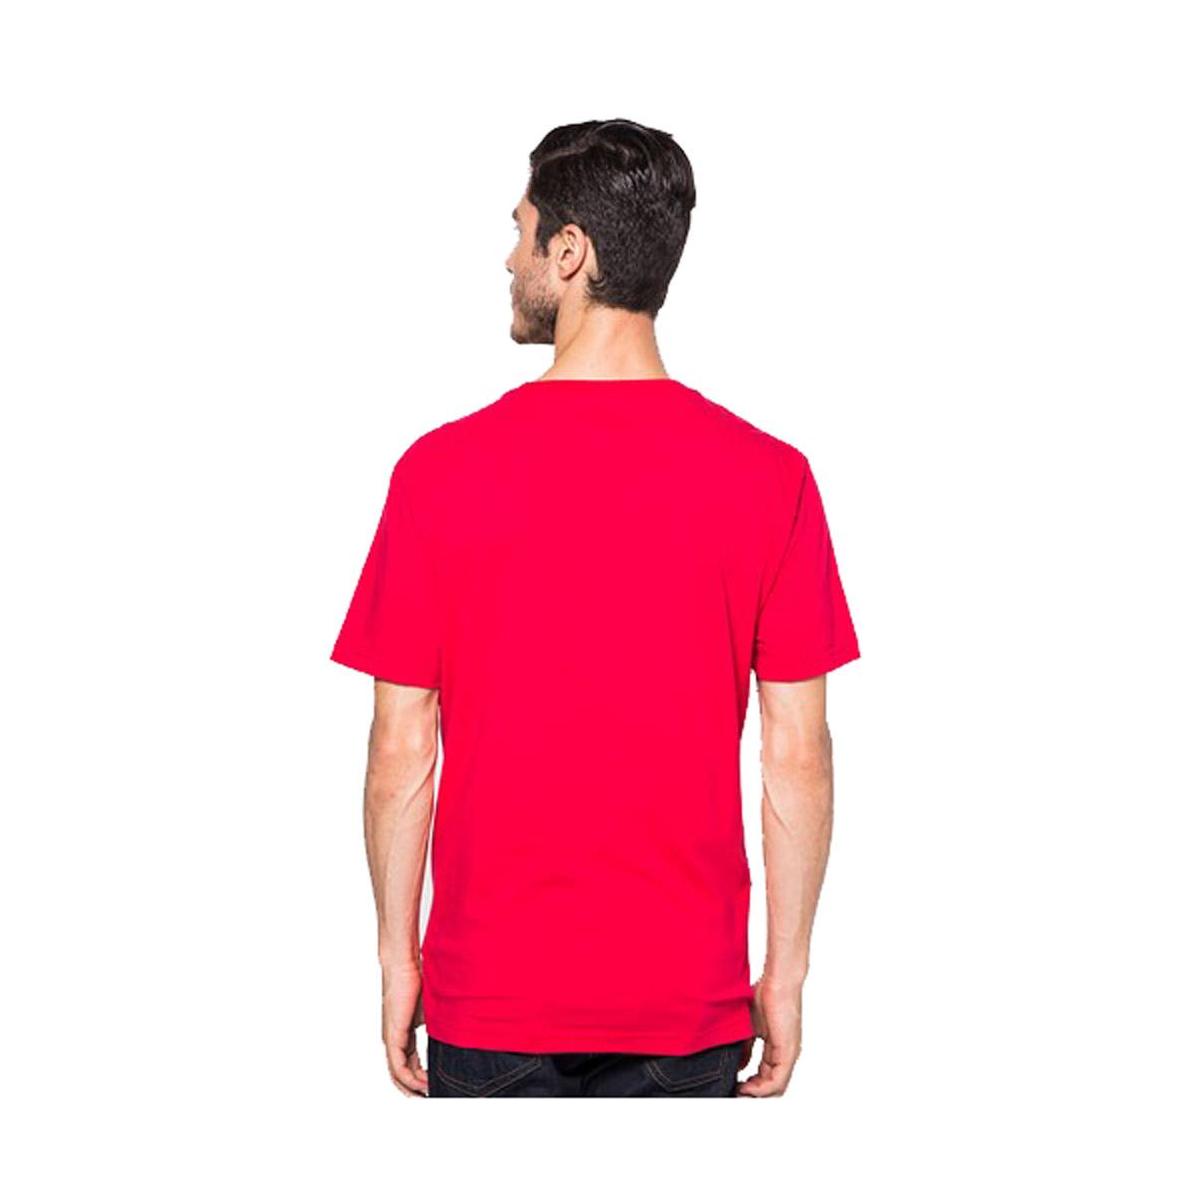 Levis T-shirt Red